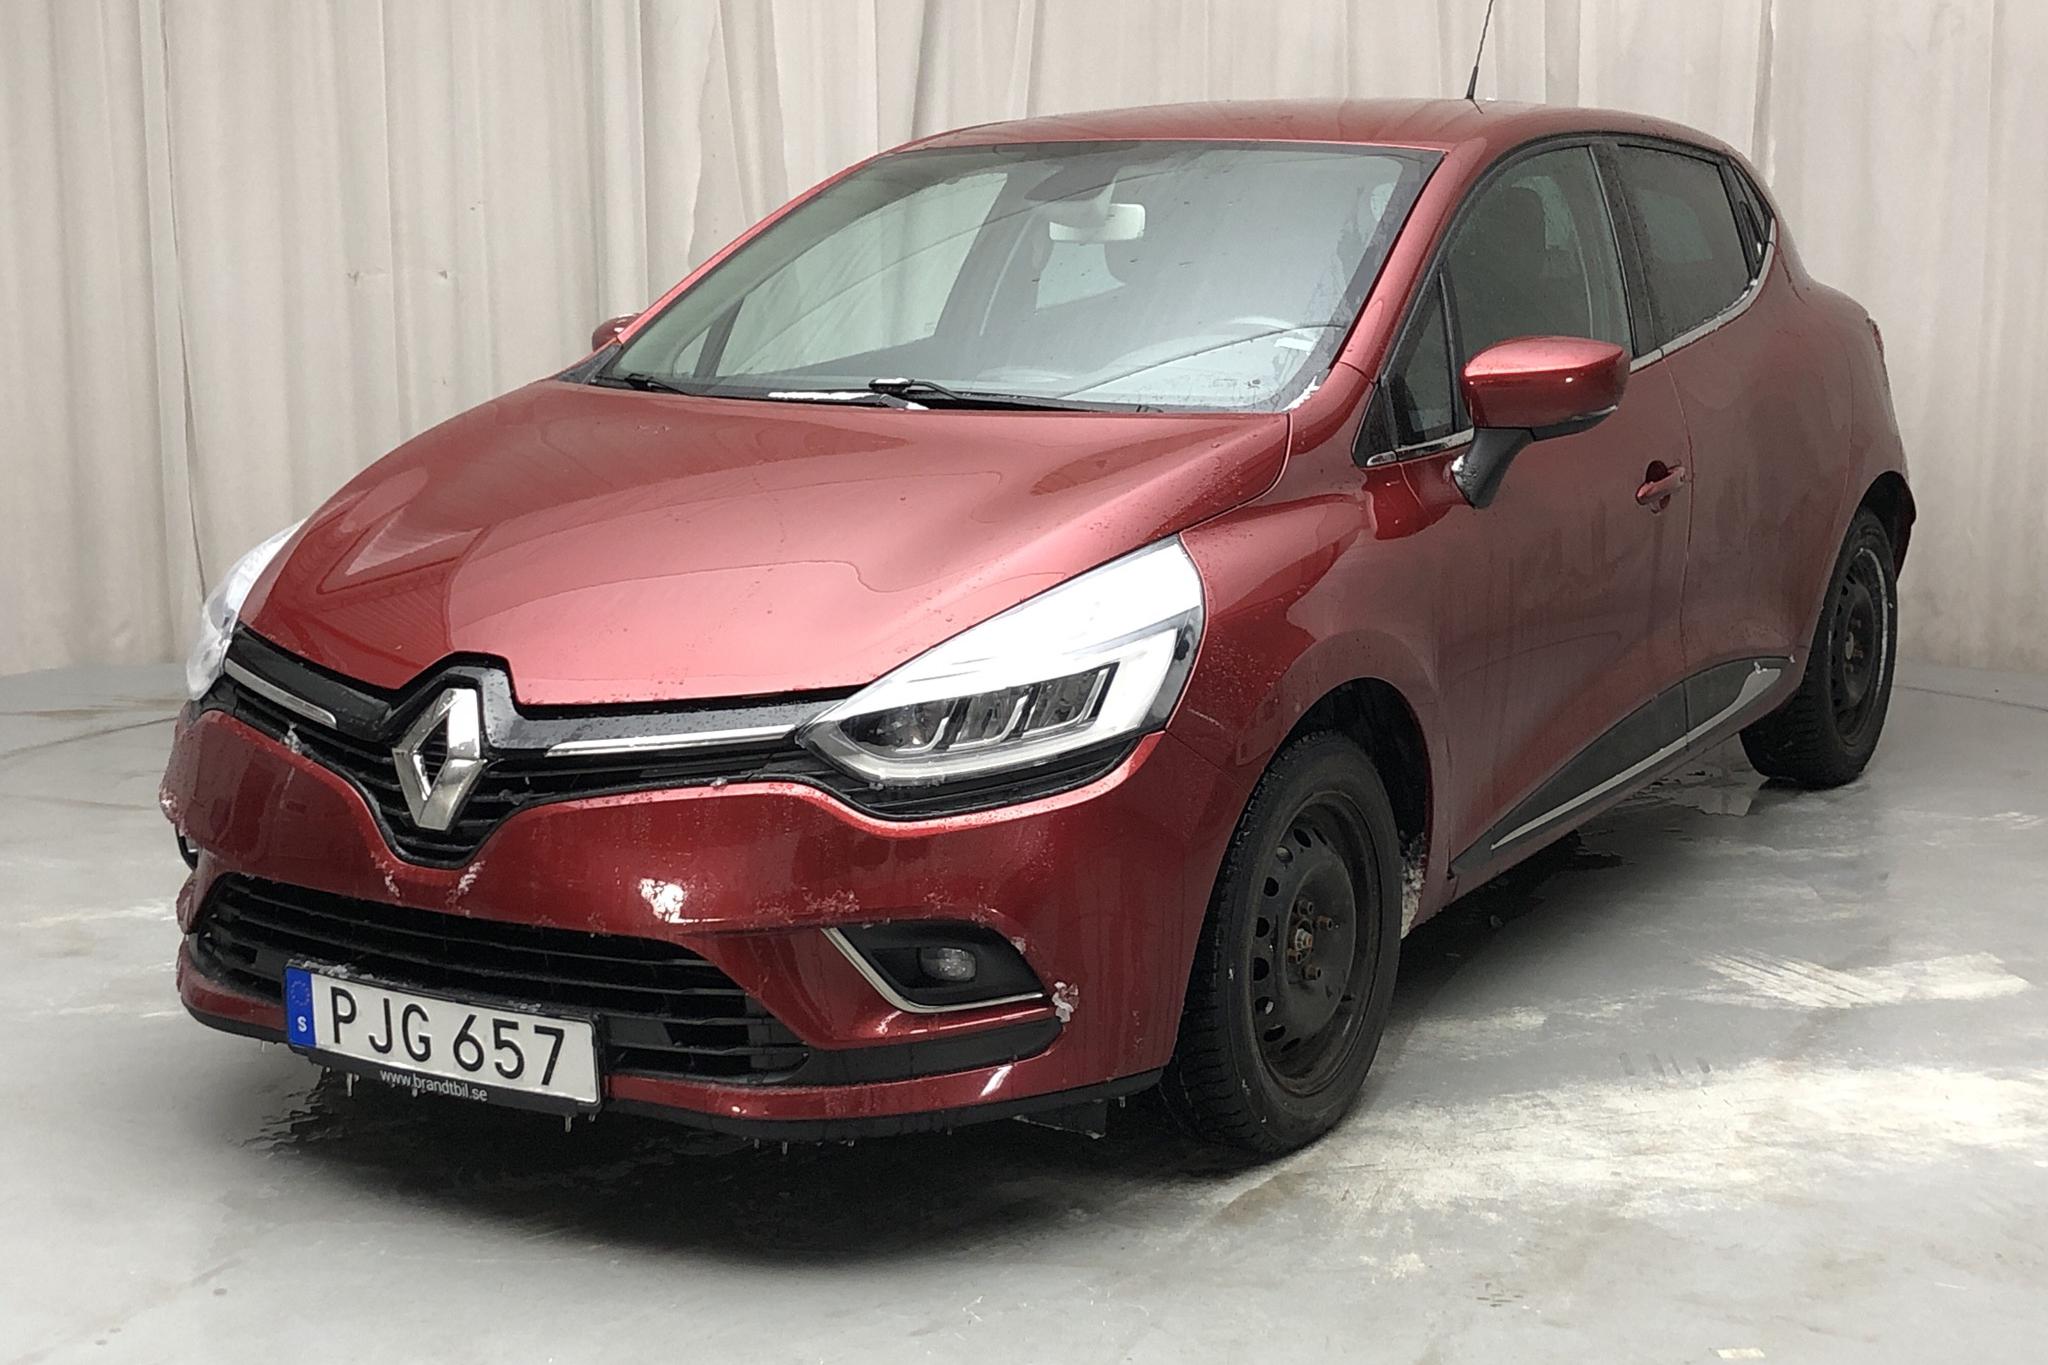 Renault Clio IV 0.9 TCe 90 5dr (90hk) - 5 591 mil - Manuell - 2017